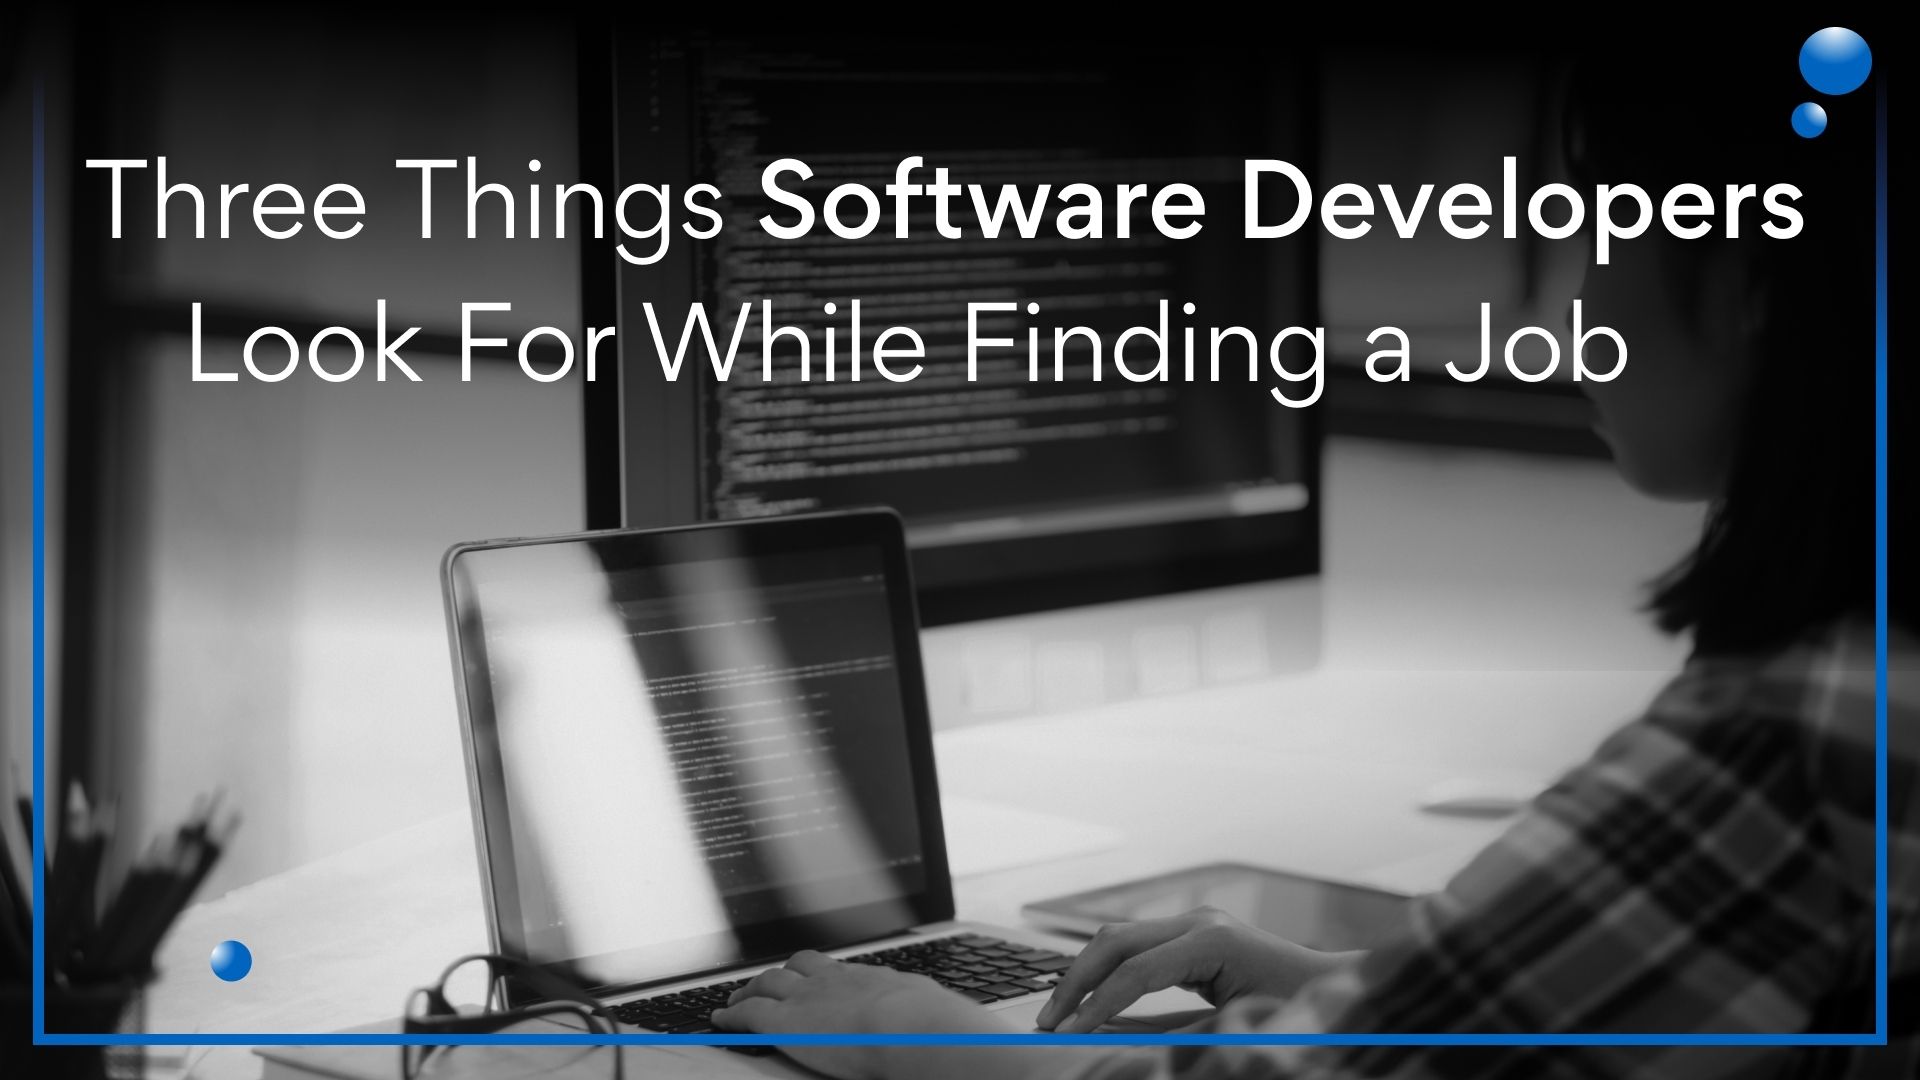 3 things software developers look for while finding a job